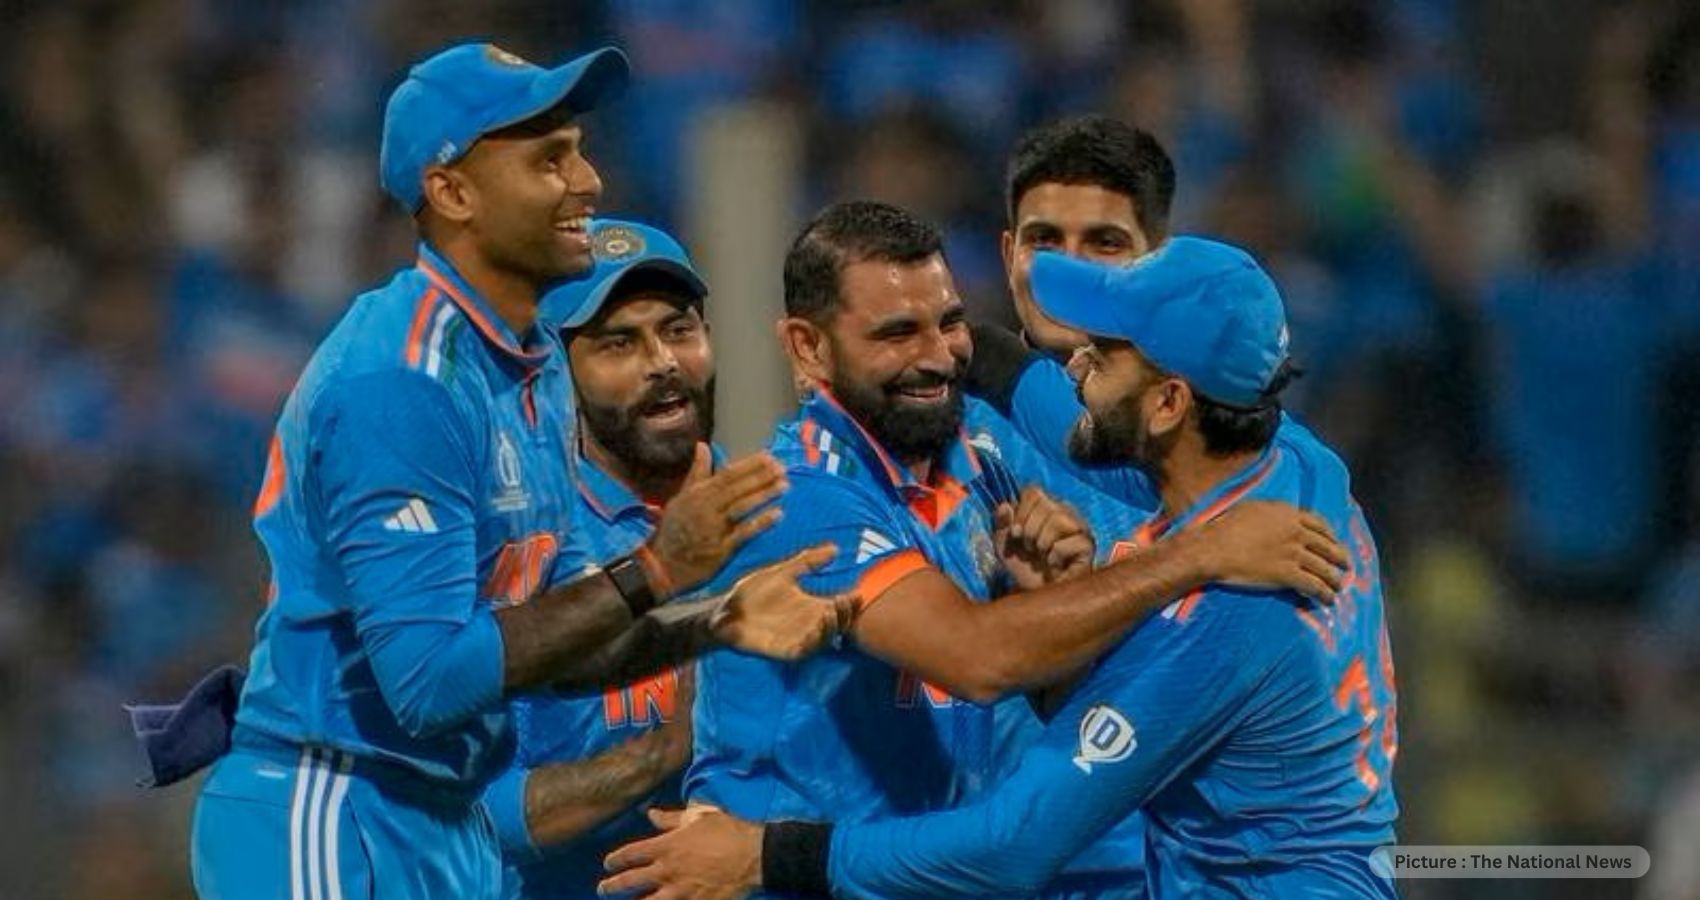 India’s Dominant Display Propels Them to World Cup Semi-Finals with a 302-Run Victory Over Sri Lanka